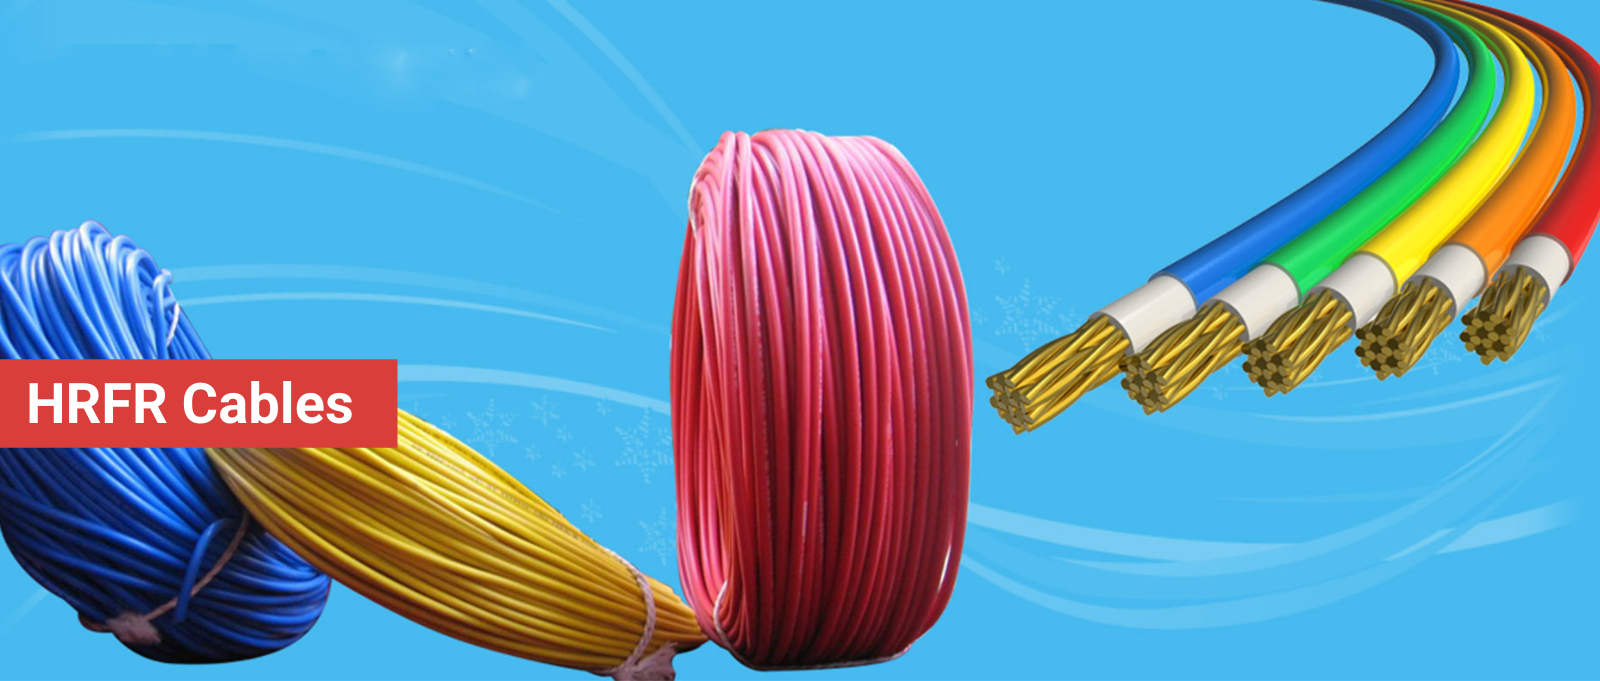 Manufacturers of HRFR Cables in Mumbai